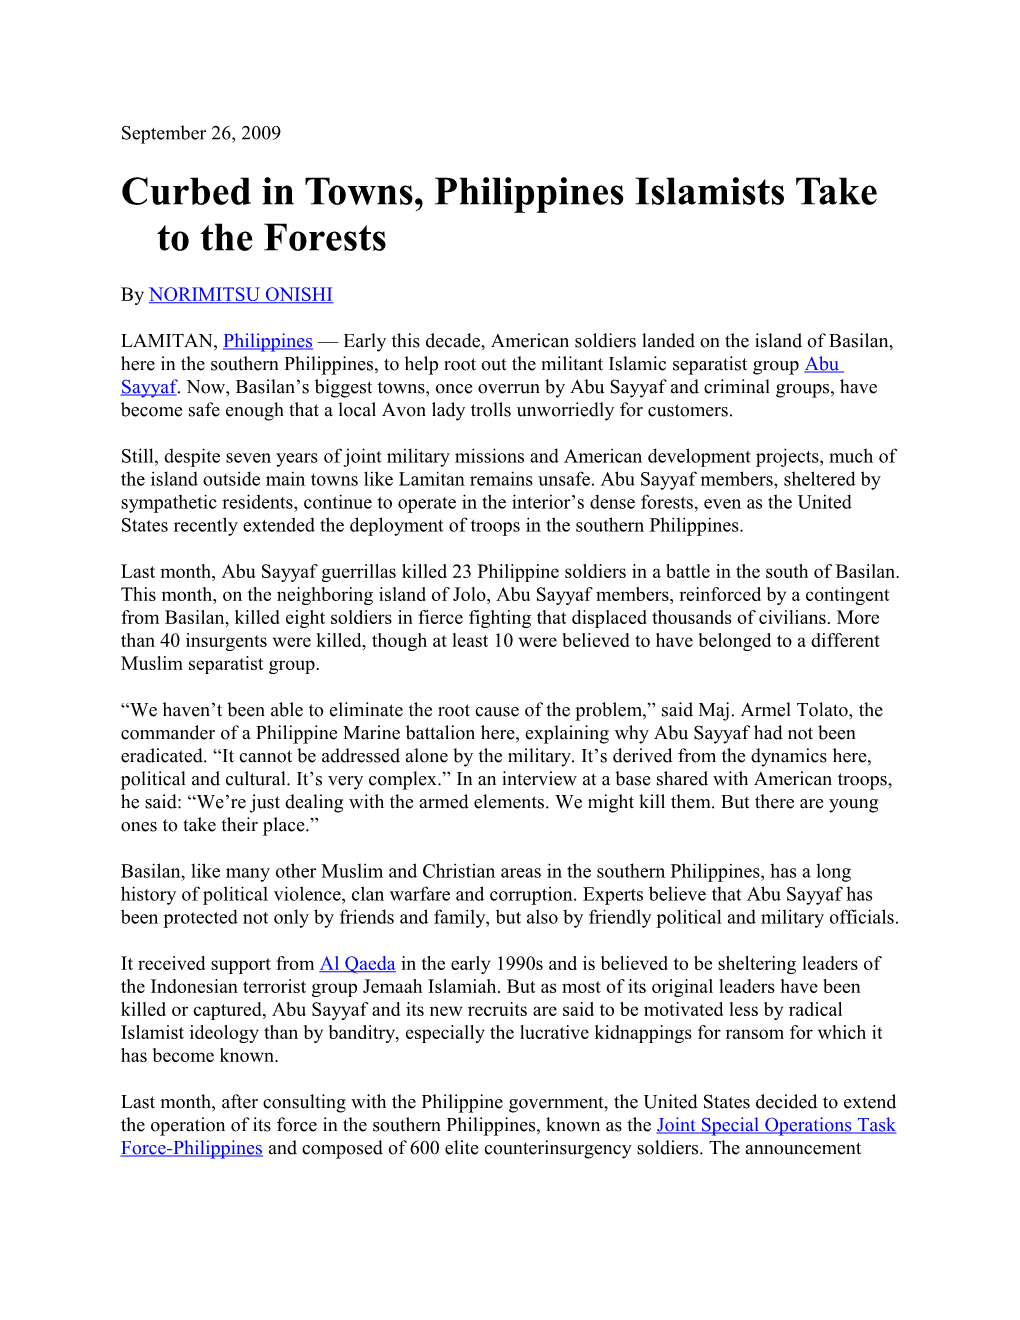 Curbed in Towns, Philippines Islamists Take to the Forests